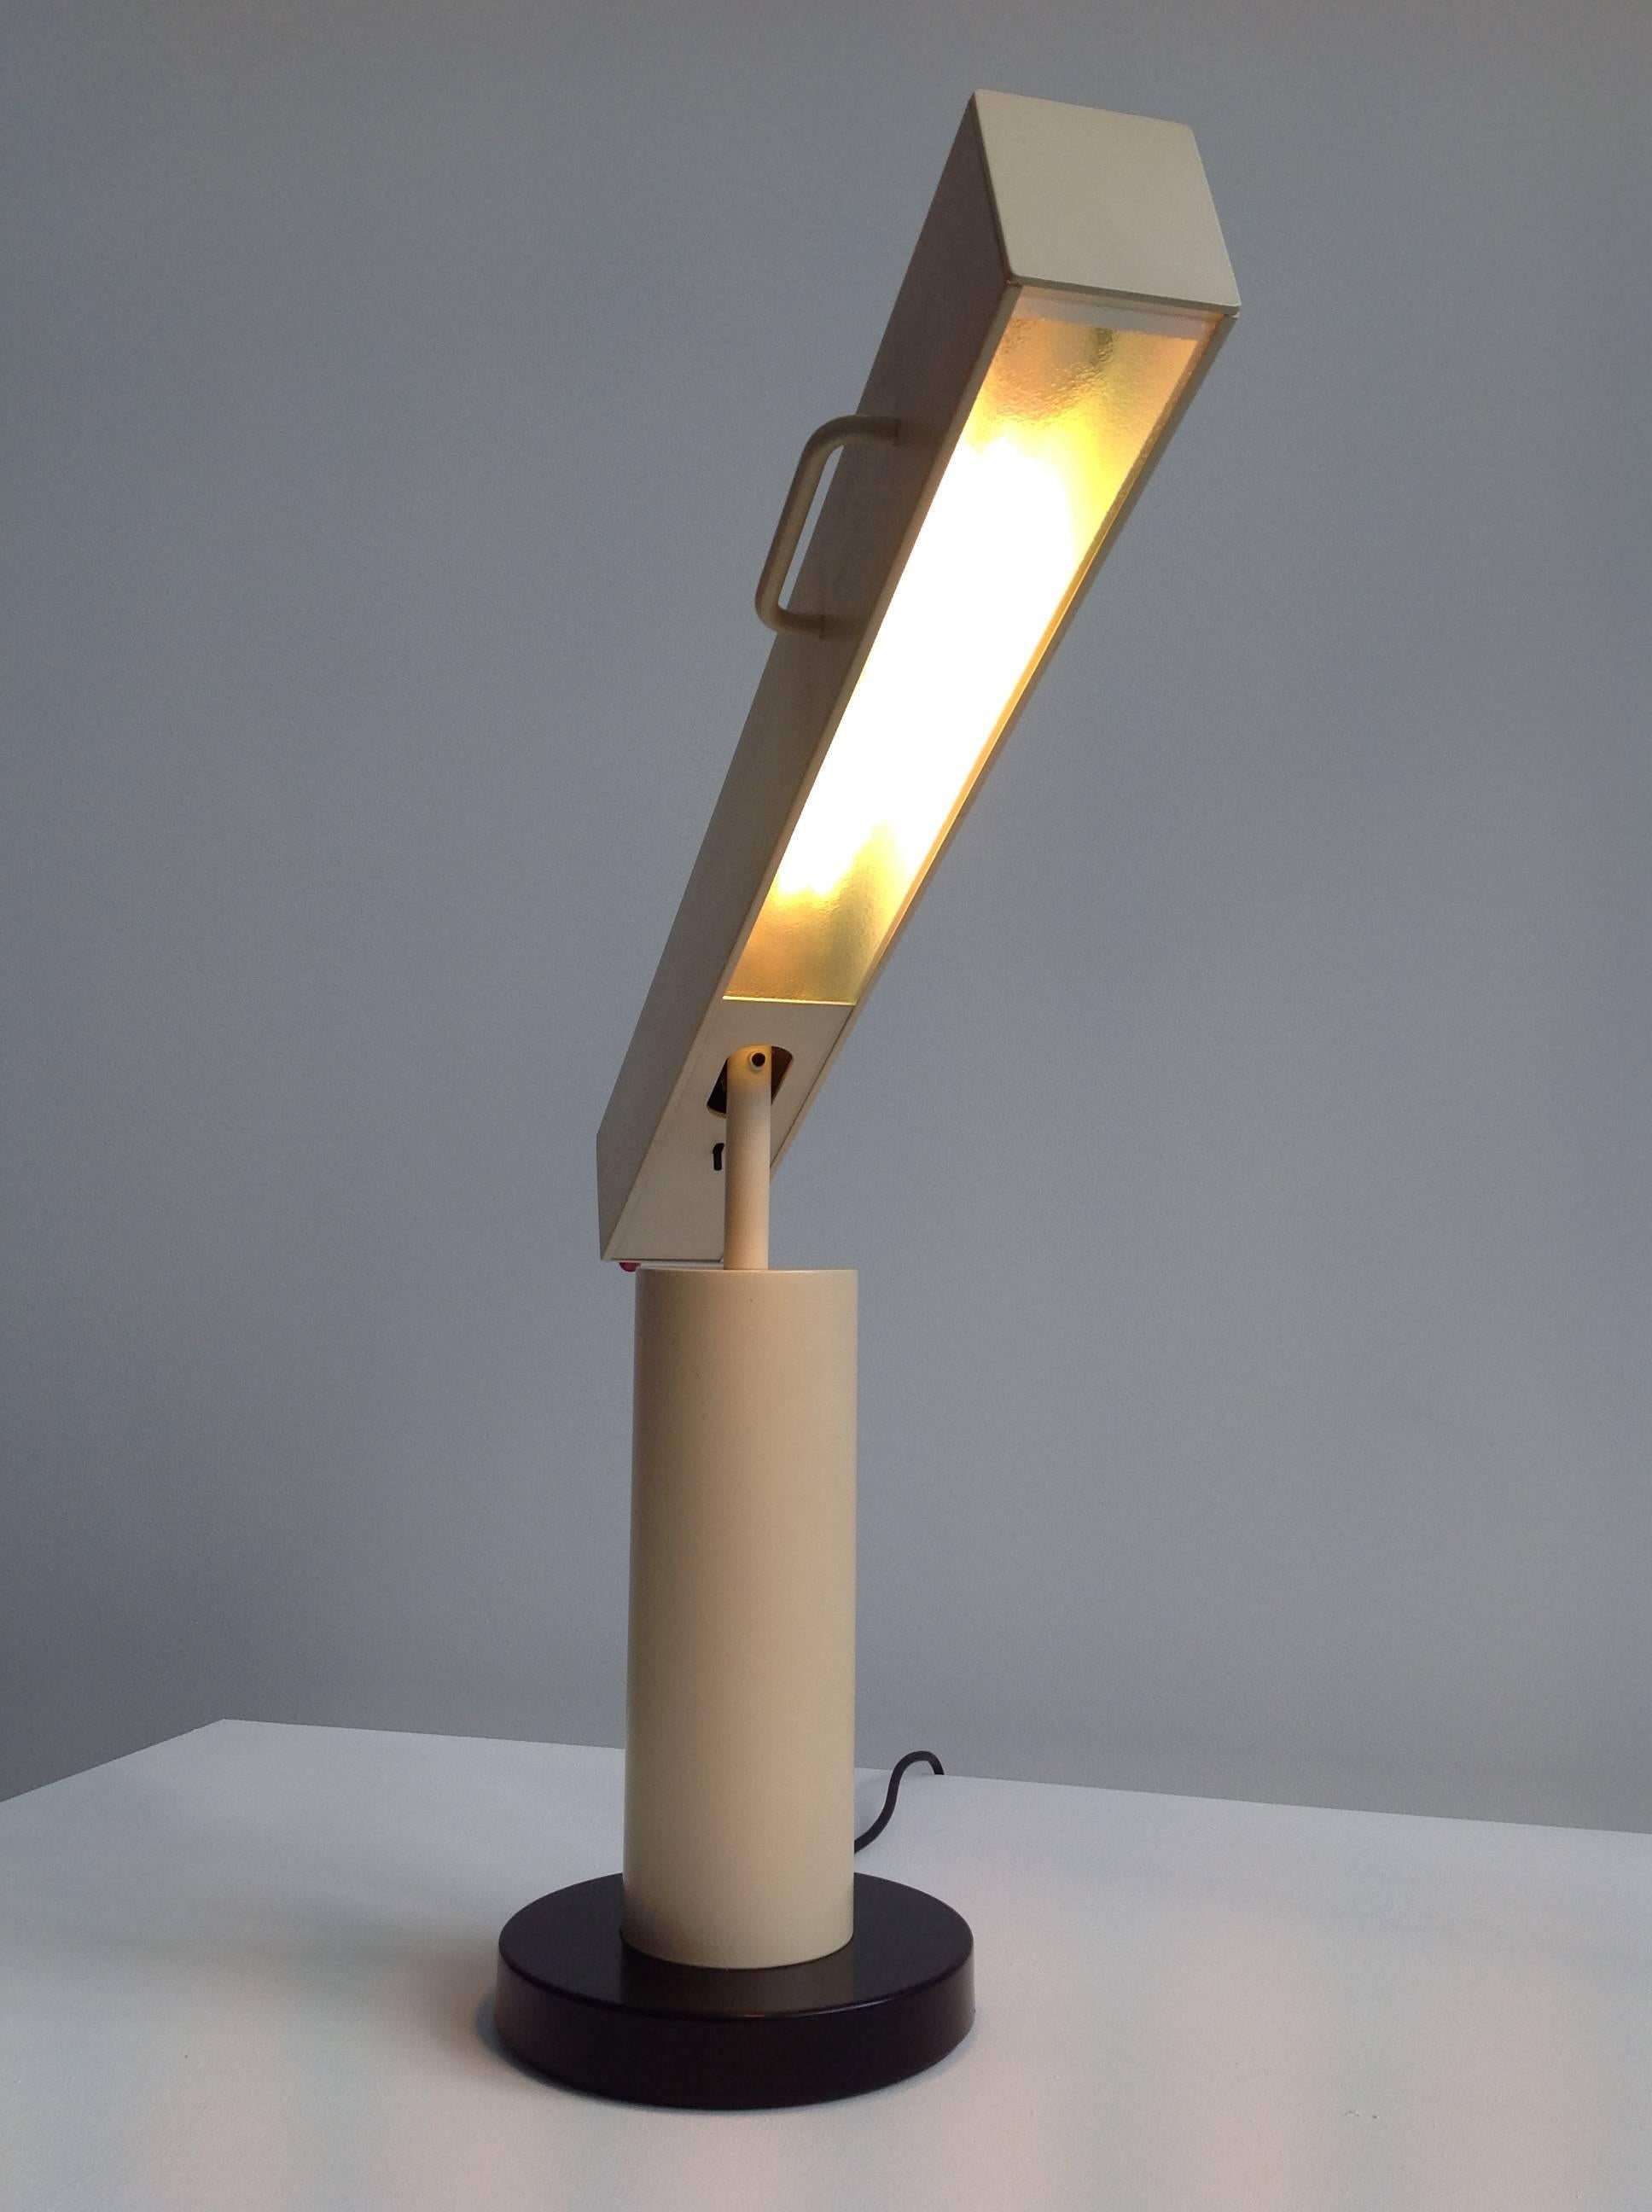 Lacquered Extremely Rare Desk Lamp Design by Ettore Sottsass, Made in Small Quantity For Sale